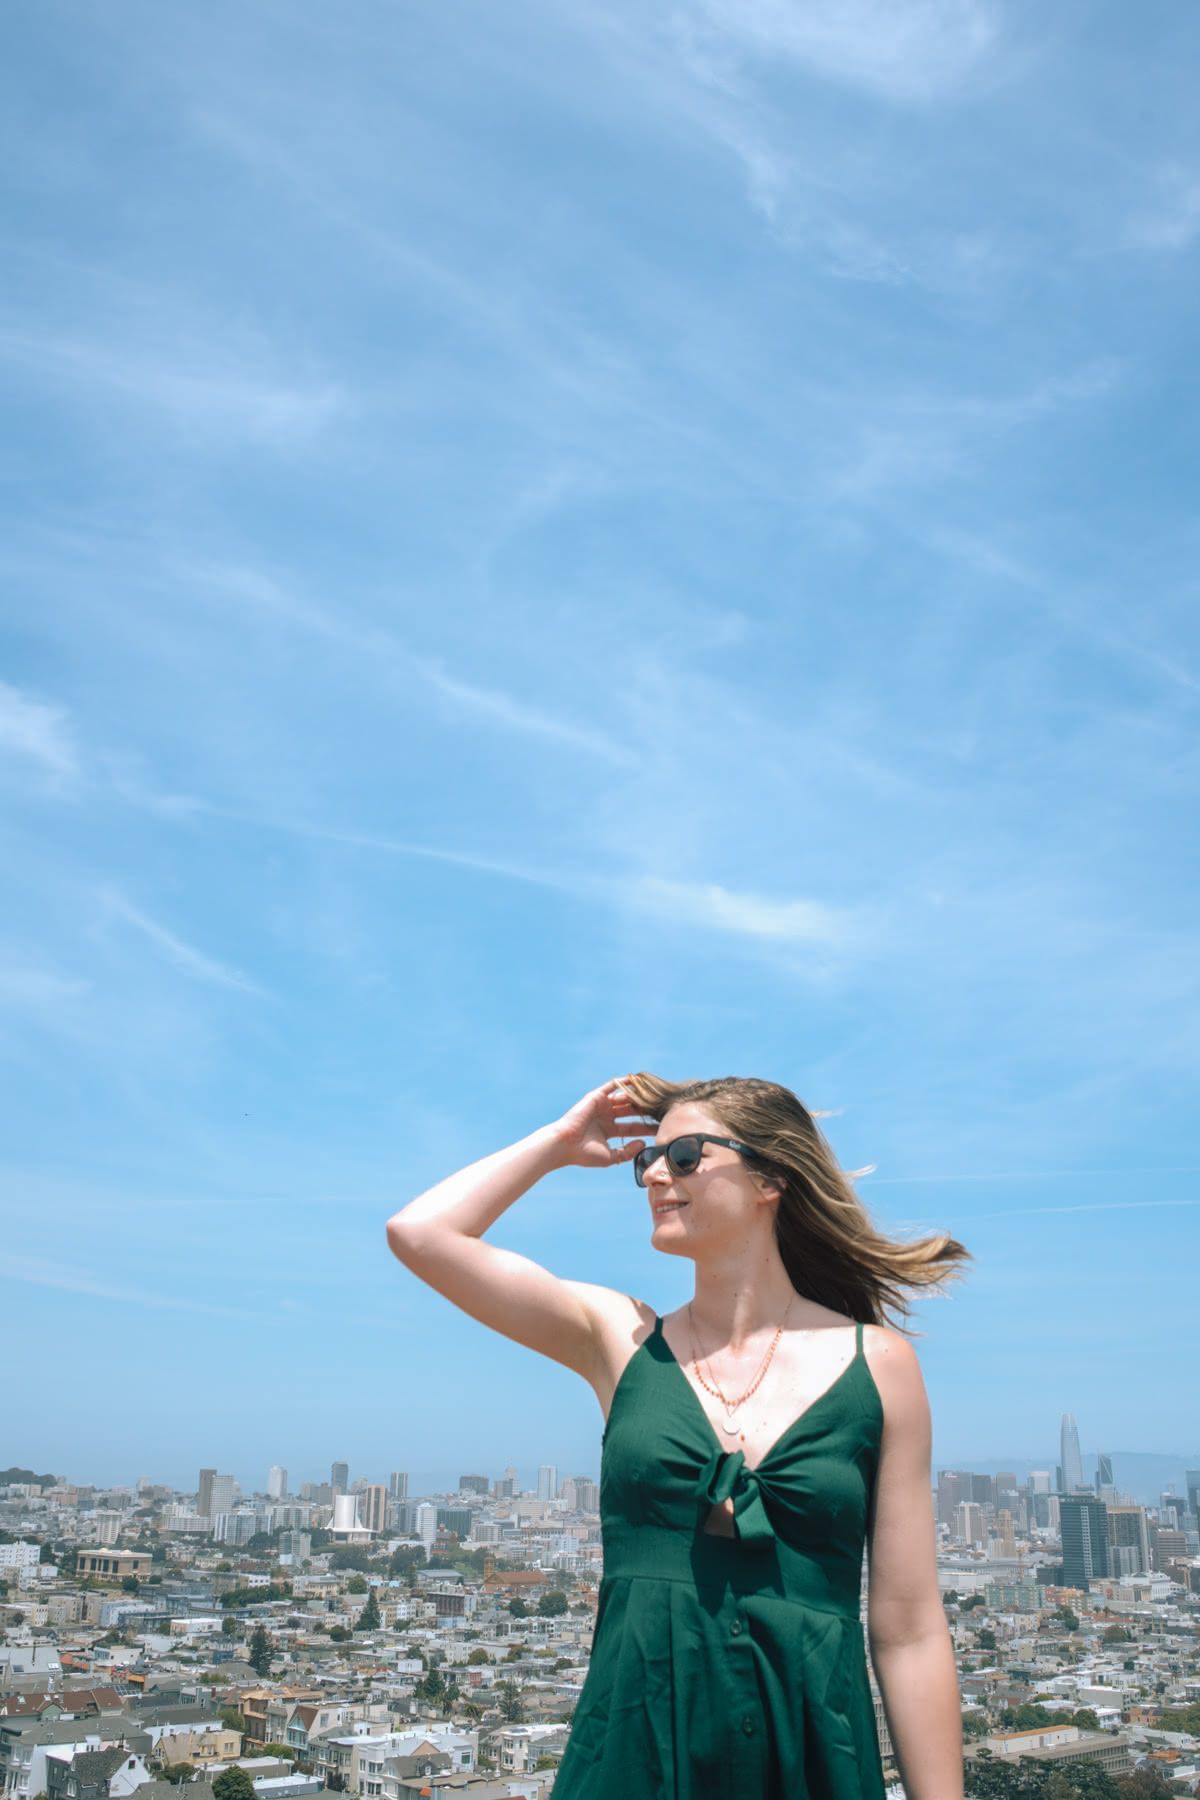 A young woman in a green dress stands on a hilltop in front of a San Francisco cityscape on a sunny day, hair blowing in the wind.